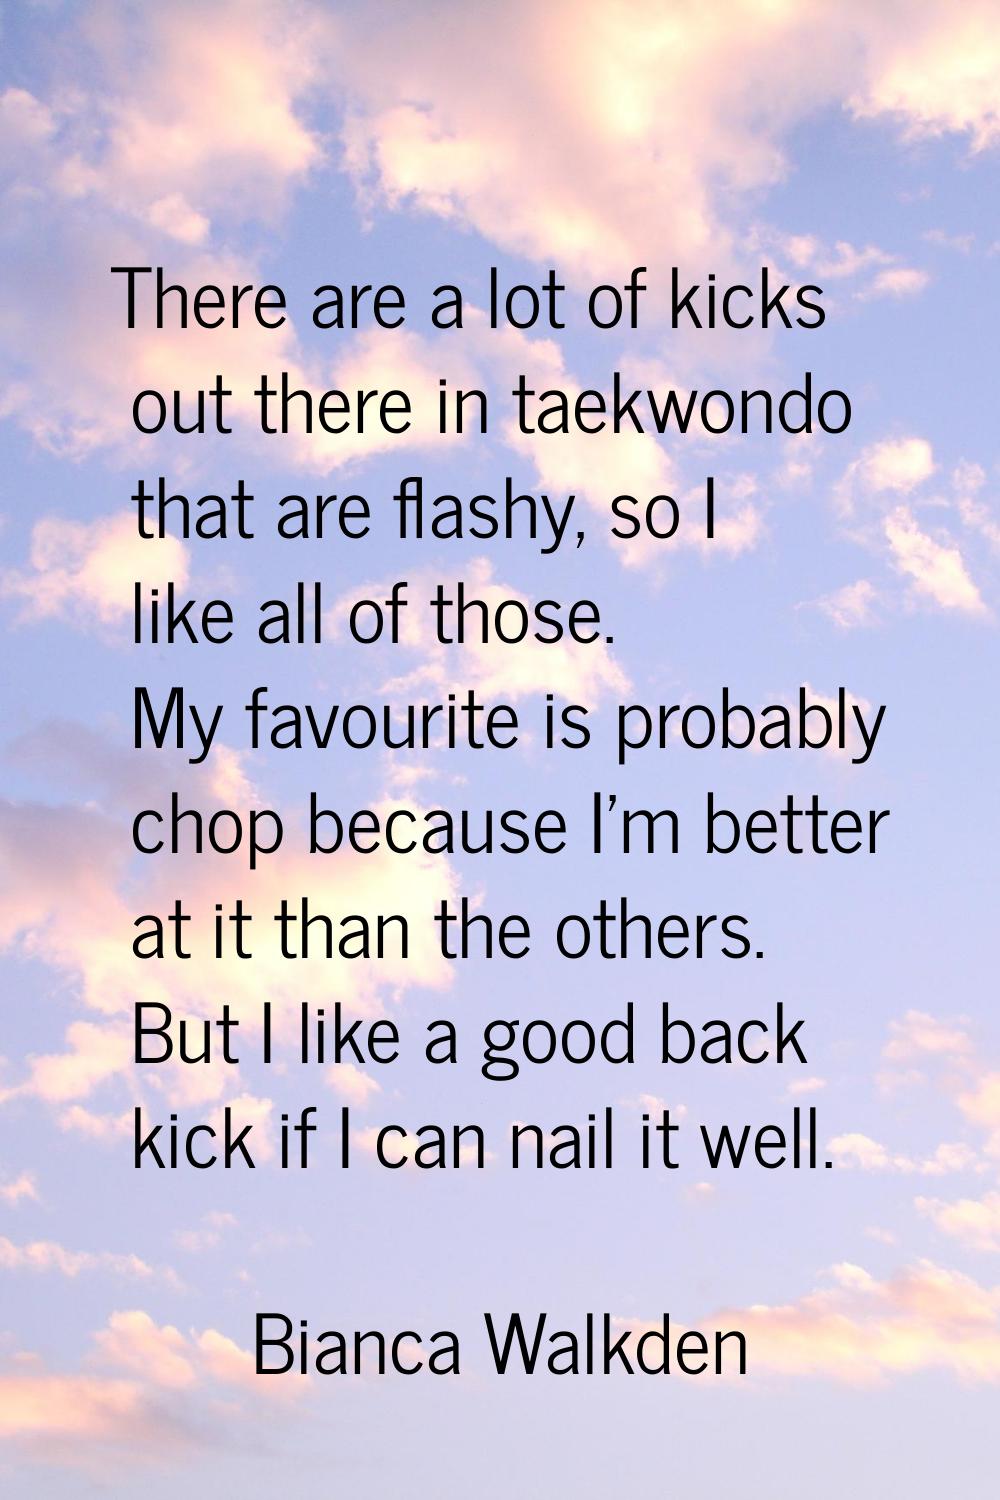 There are a lot of kicks out there in taekwondo that are flashy, so I like all of those. My favouri